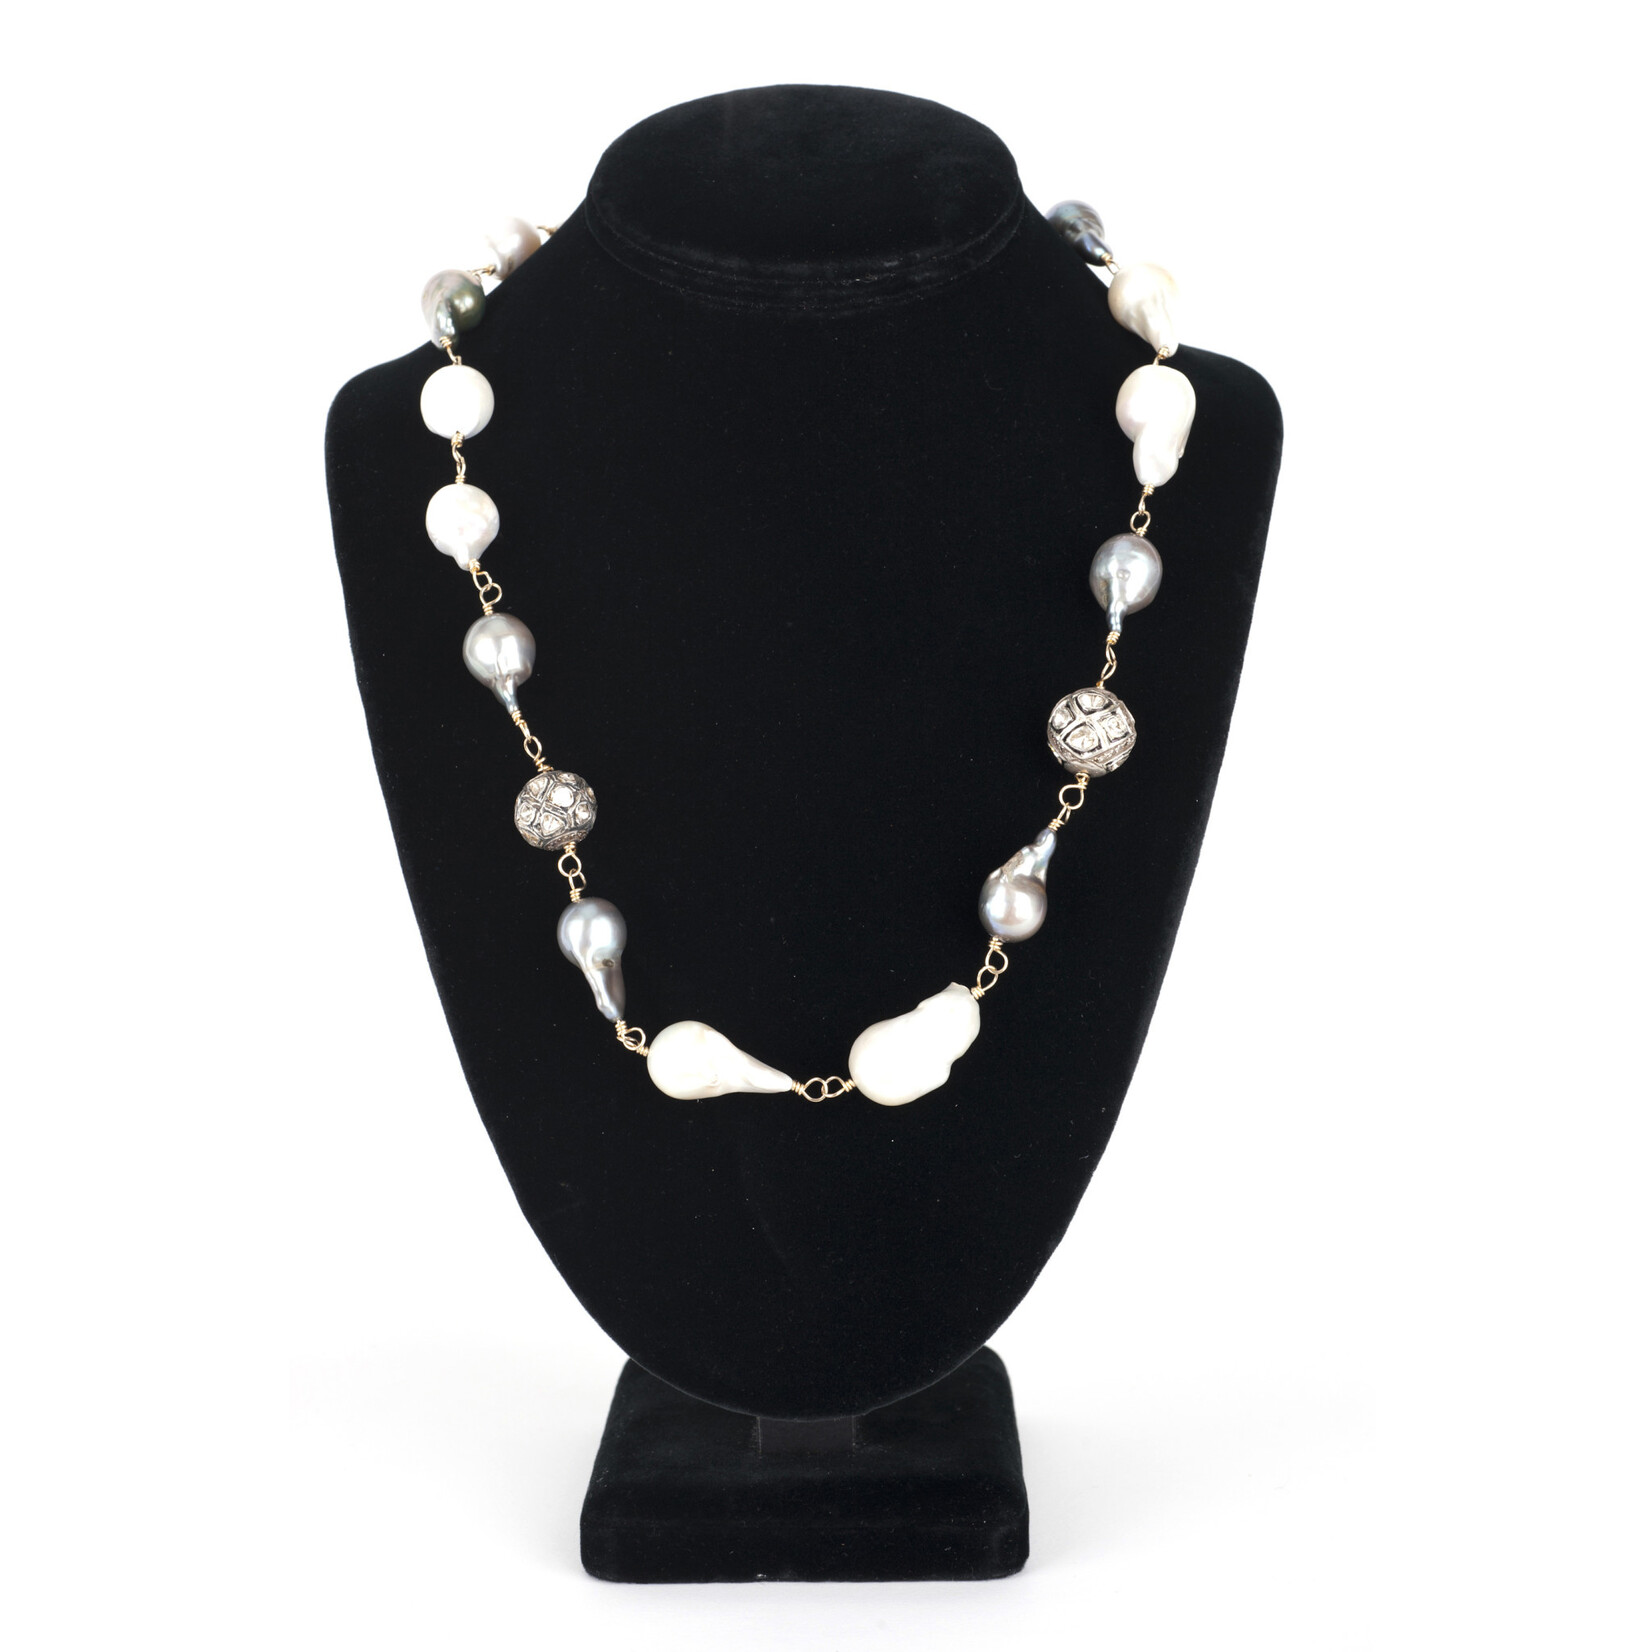 Mina Danielle Baroque Pearl Chain Link Necklace with 3 Rose Cut Diamonds